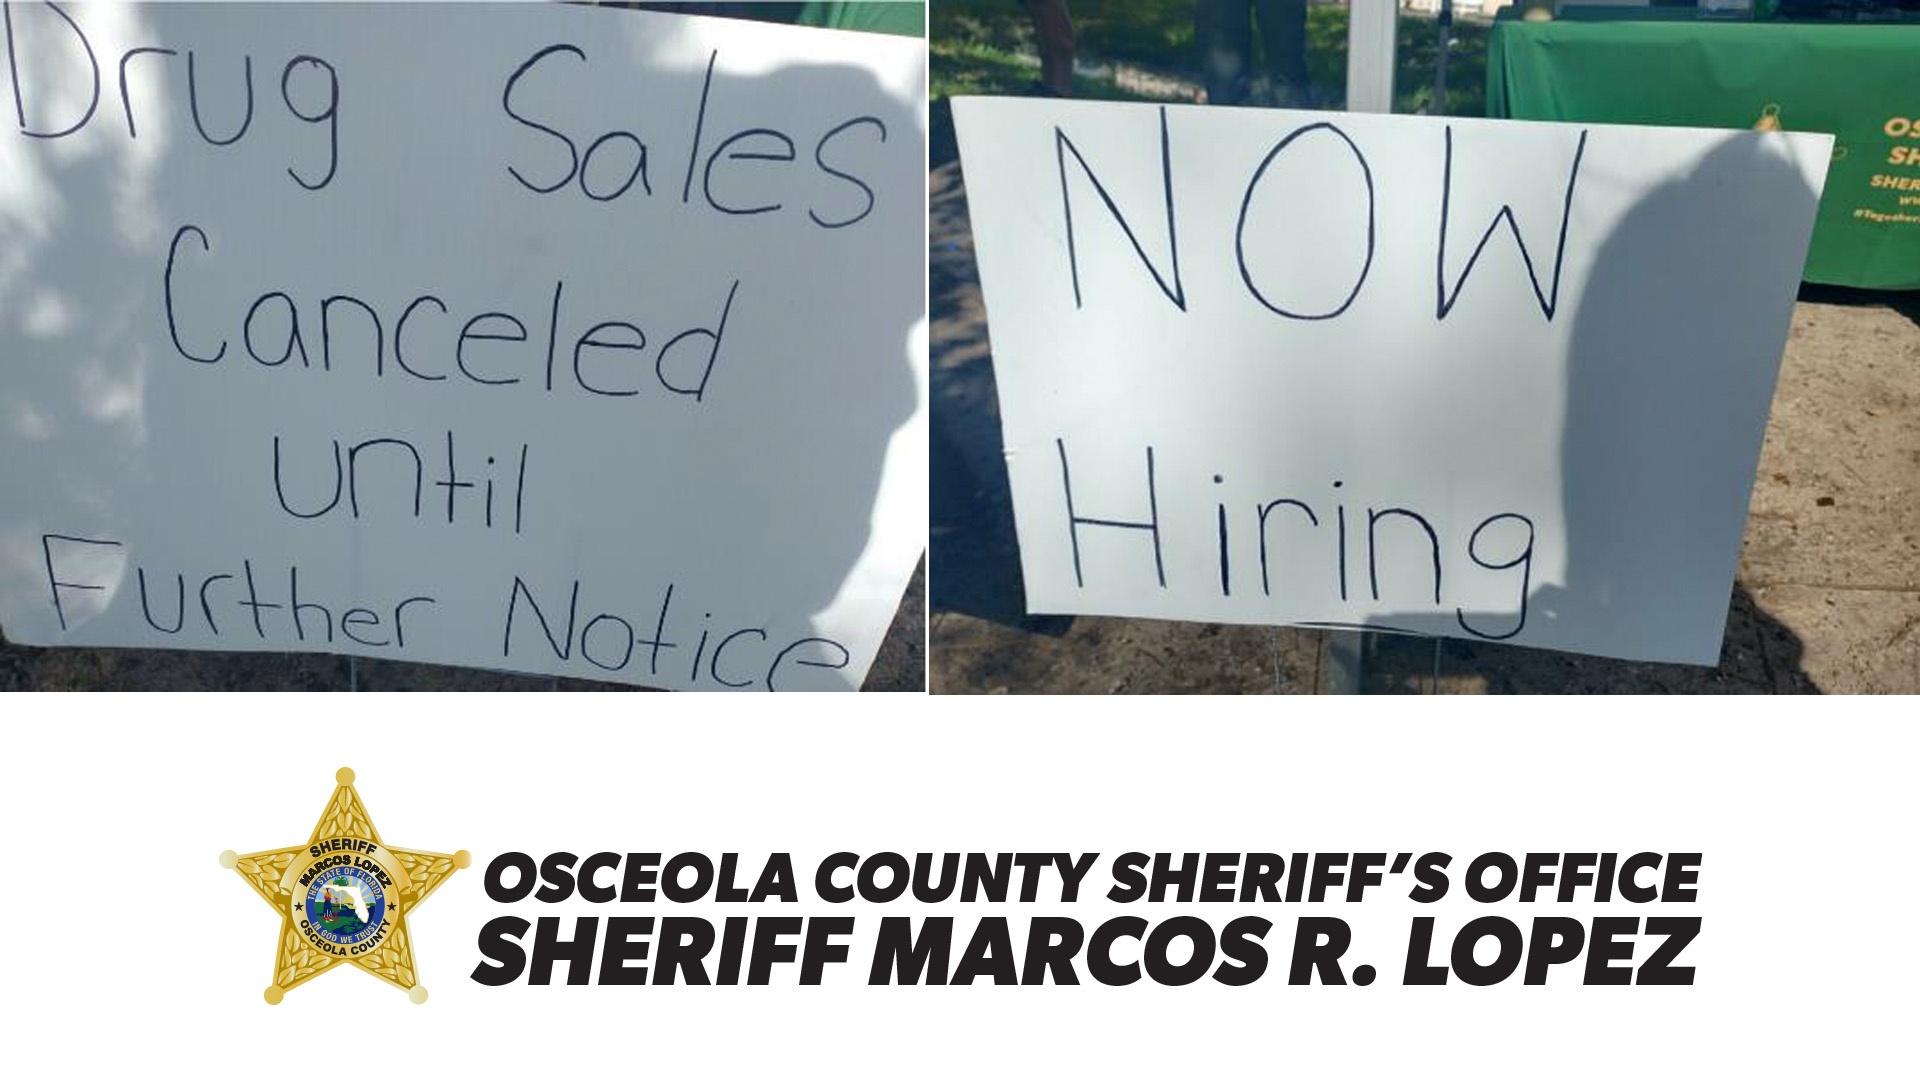 The Sheriff has set up a recruiting tent outside of the Key West Marketplace located at 2331 Old Dixie Hwy and is looking for courageous and dedicated individuals to join the Osceola County Sheriff’s Office family.